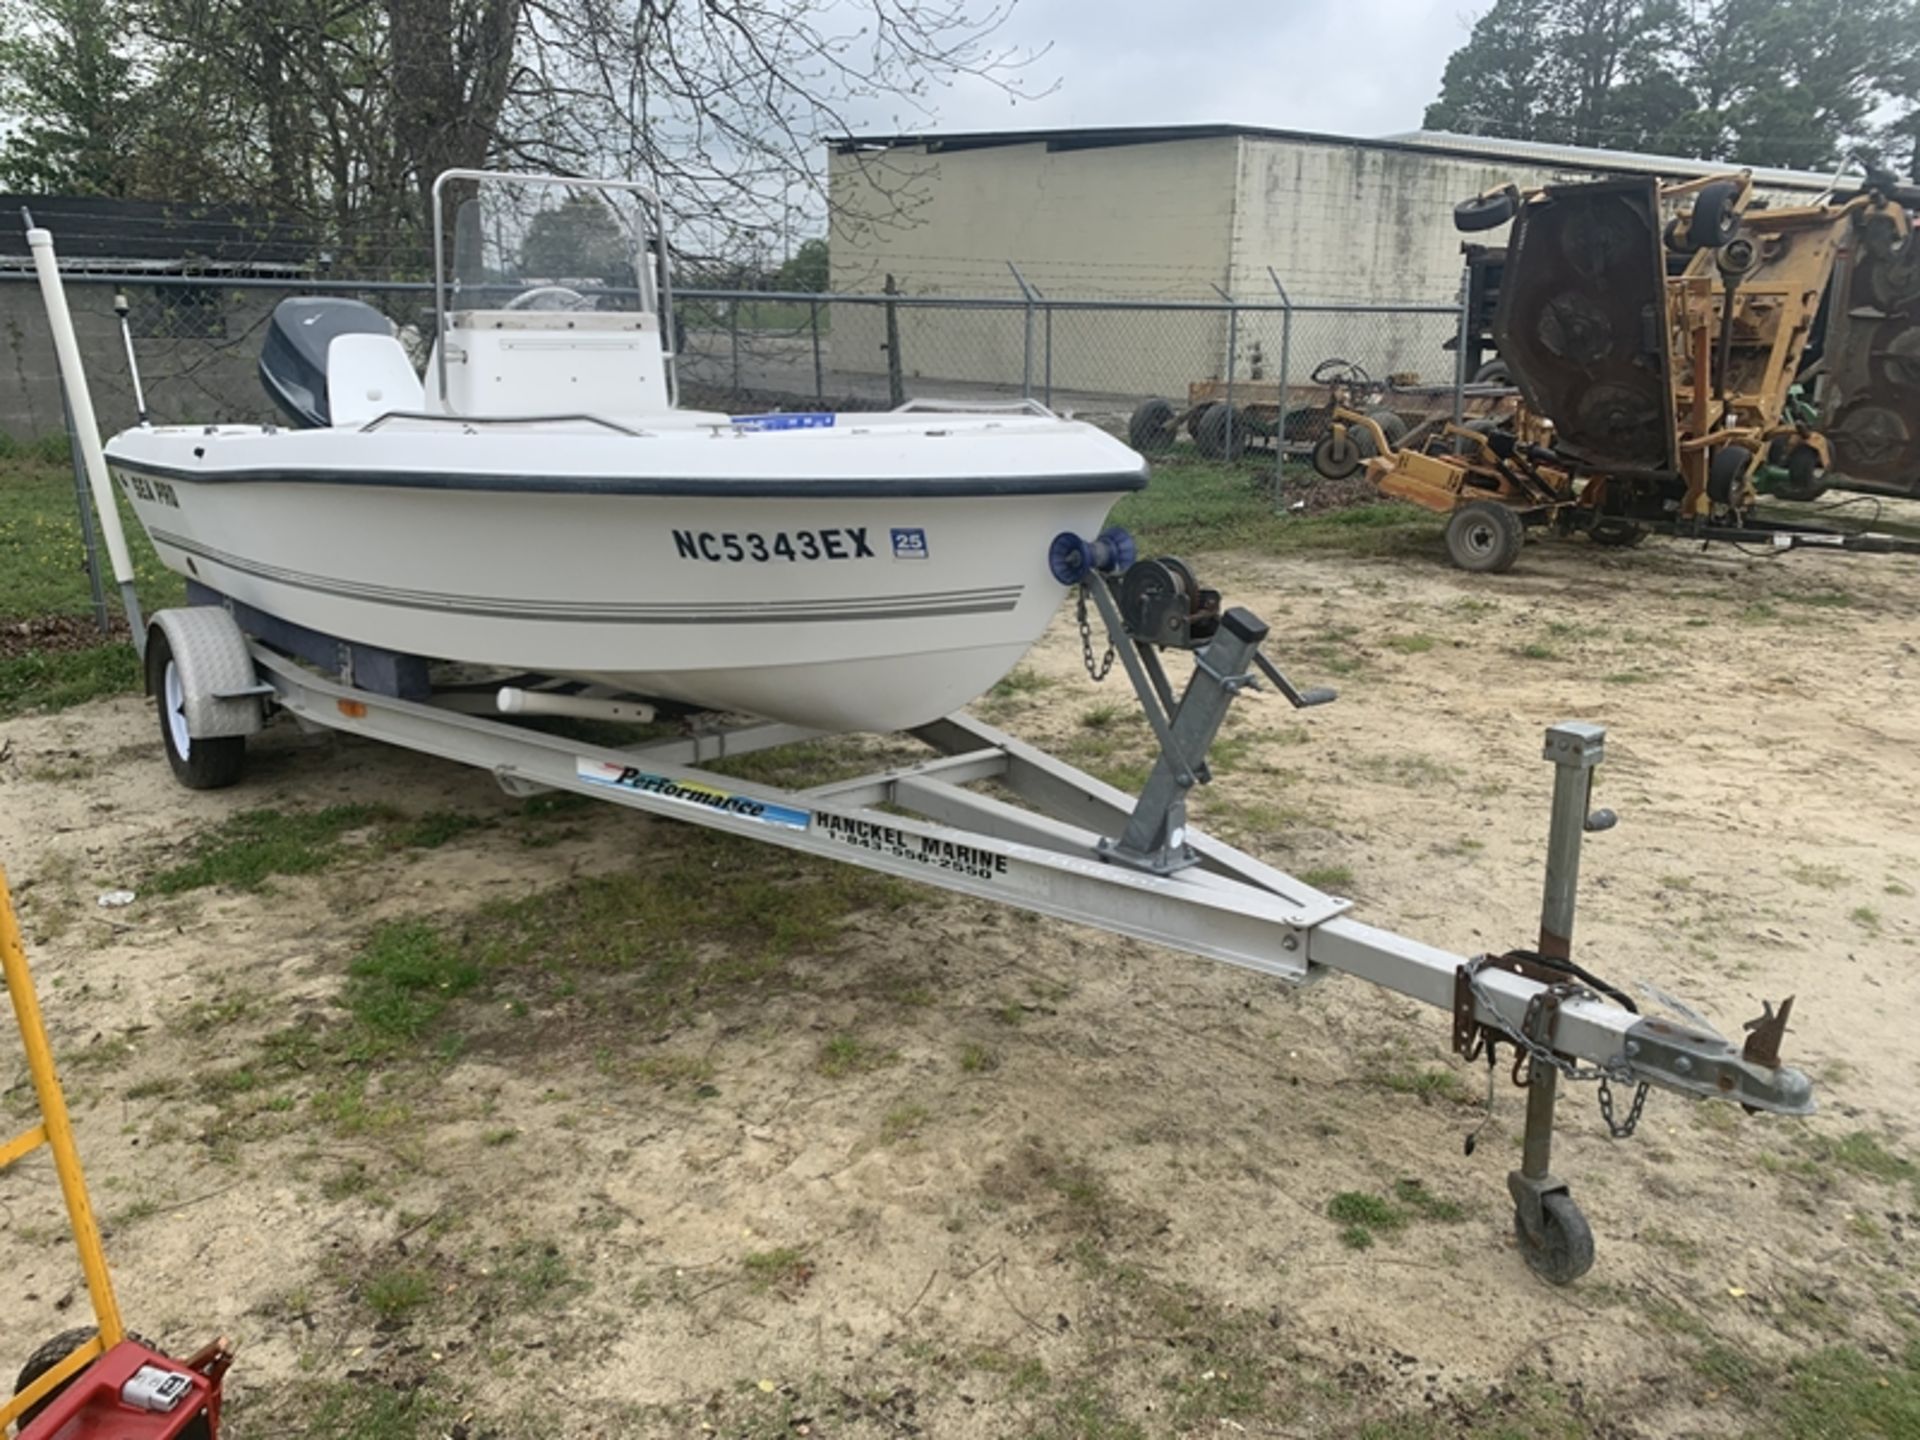 2003 SEA PRO 170 17' fiberglass center console with Yamaha 115 and trailer - HULL ID - PIOLB978K203 - Image 2 of 9